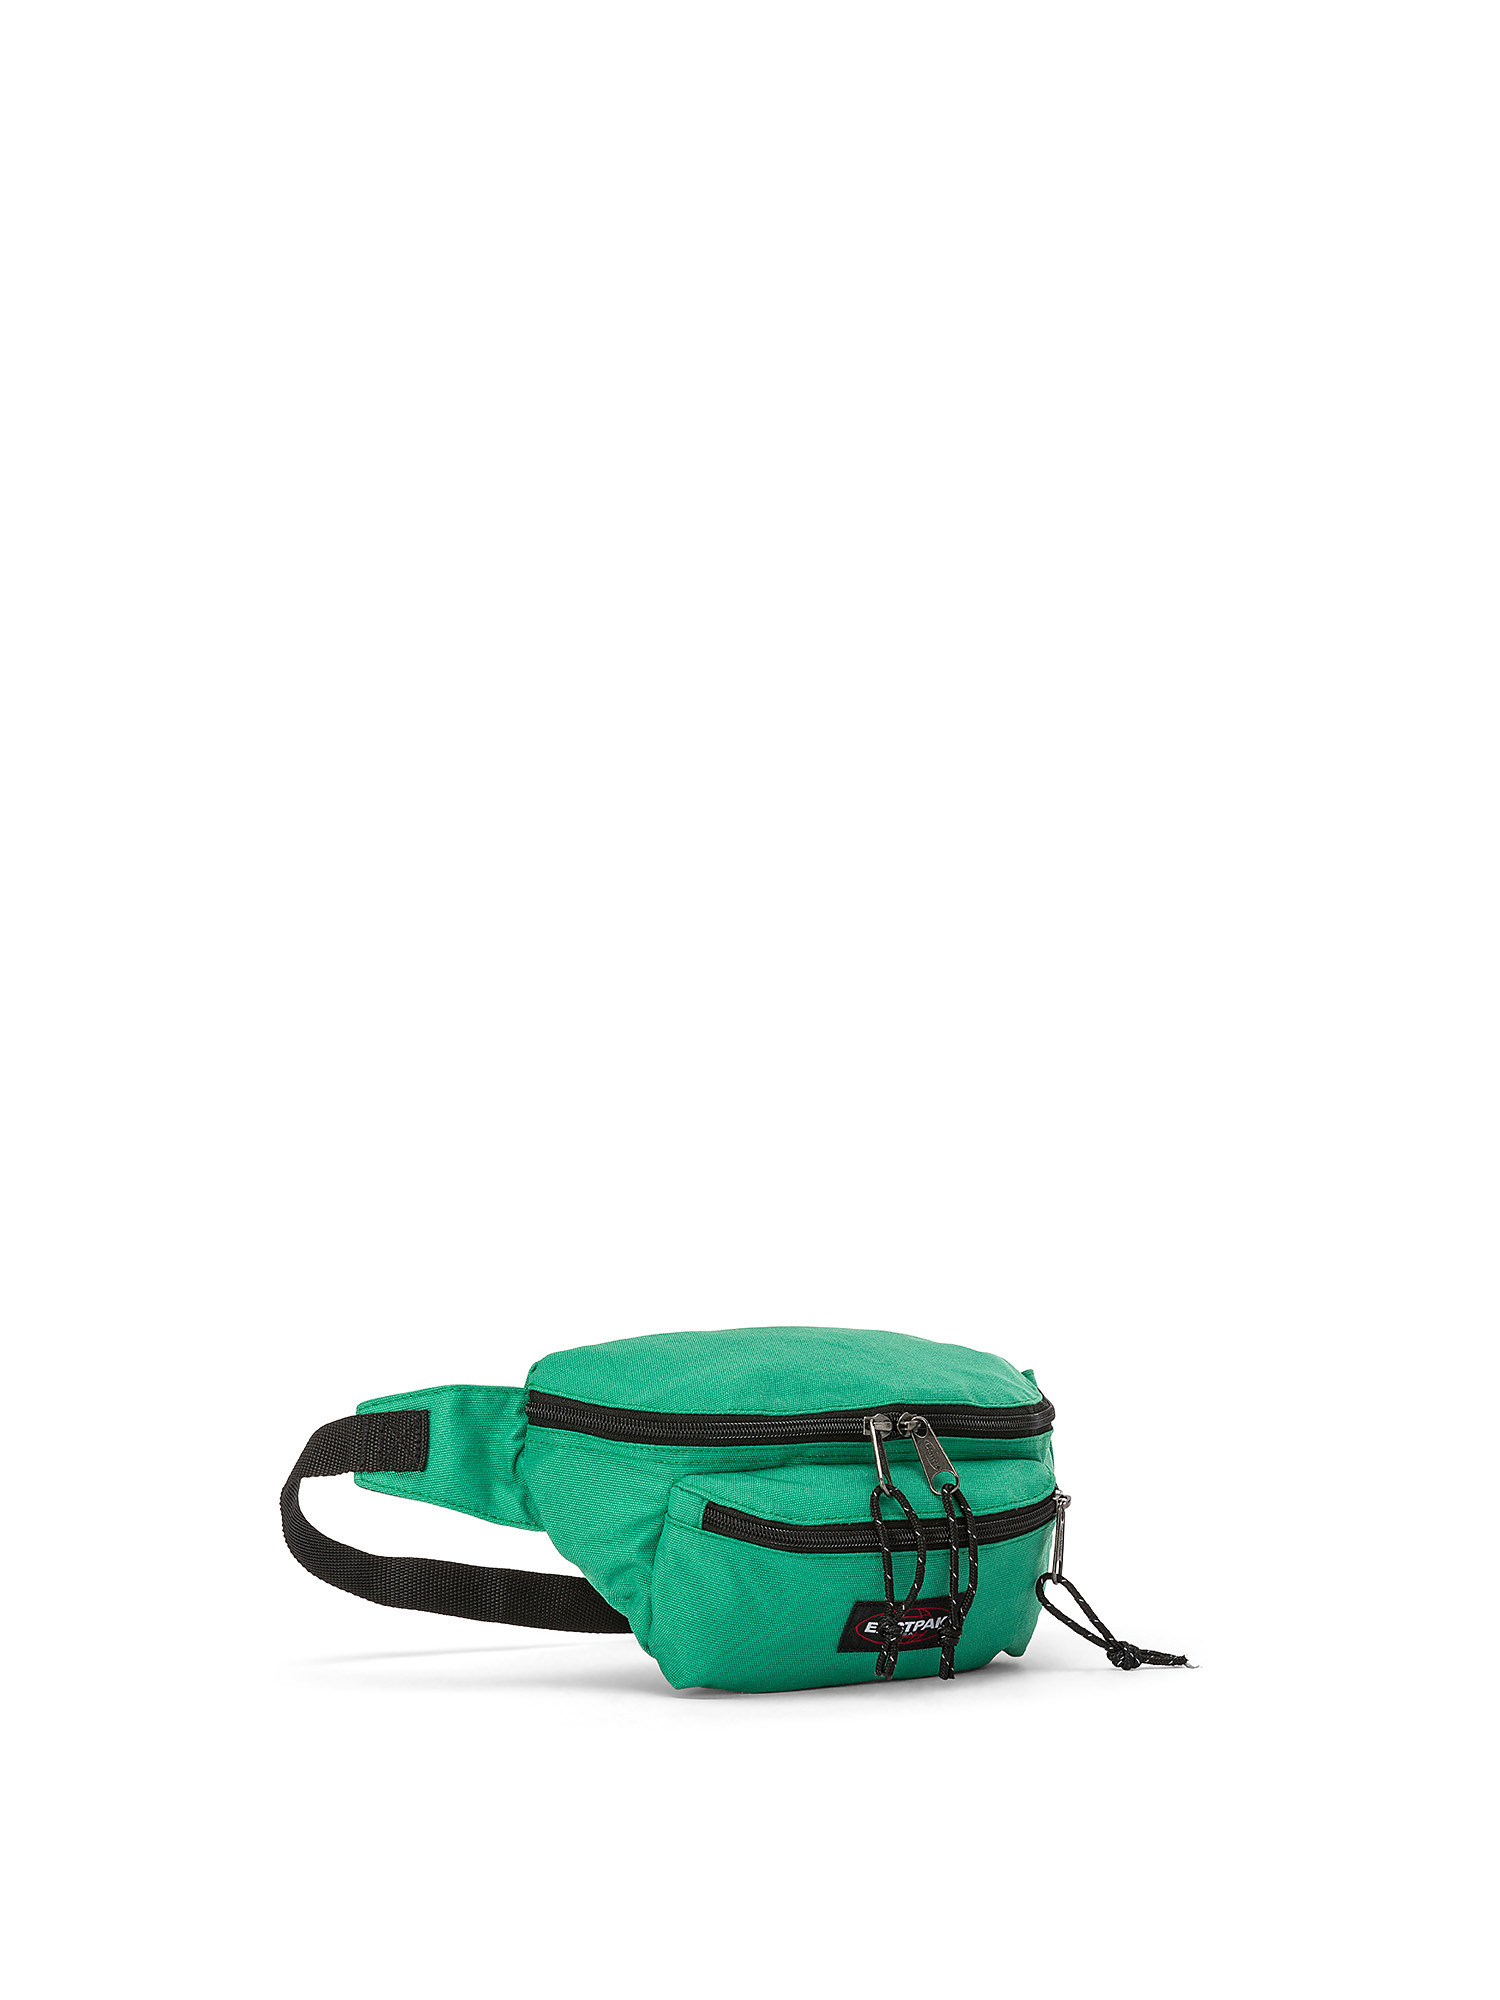 Eastpak - Pouch Doggy Bag Grass Green, Green, large image number 1